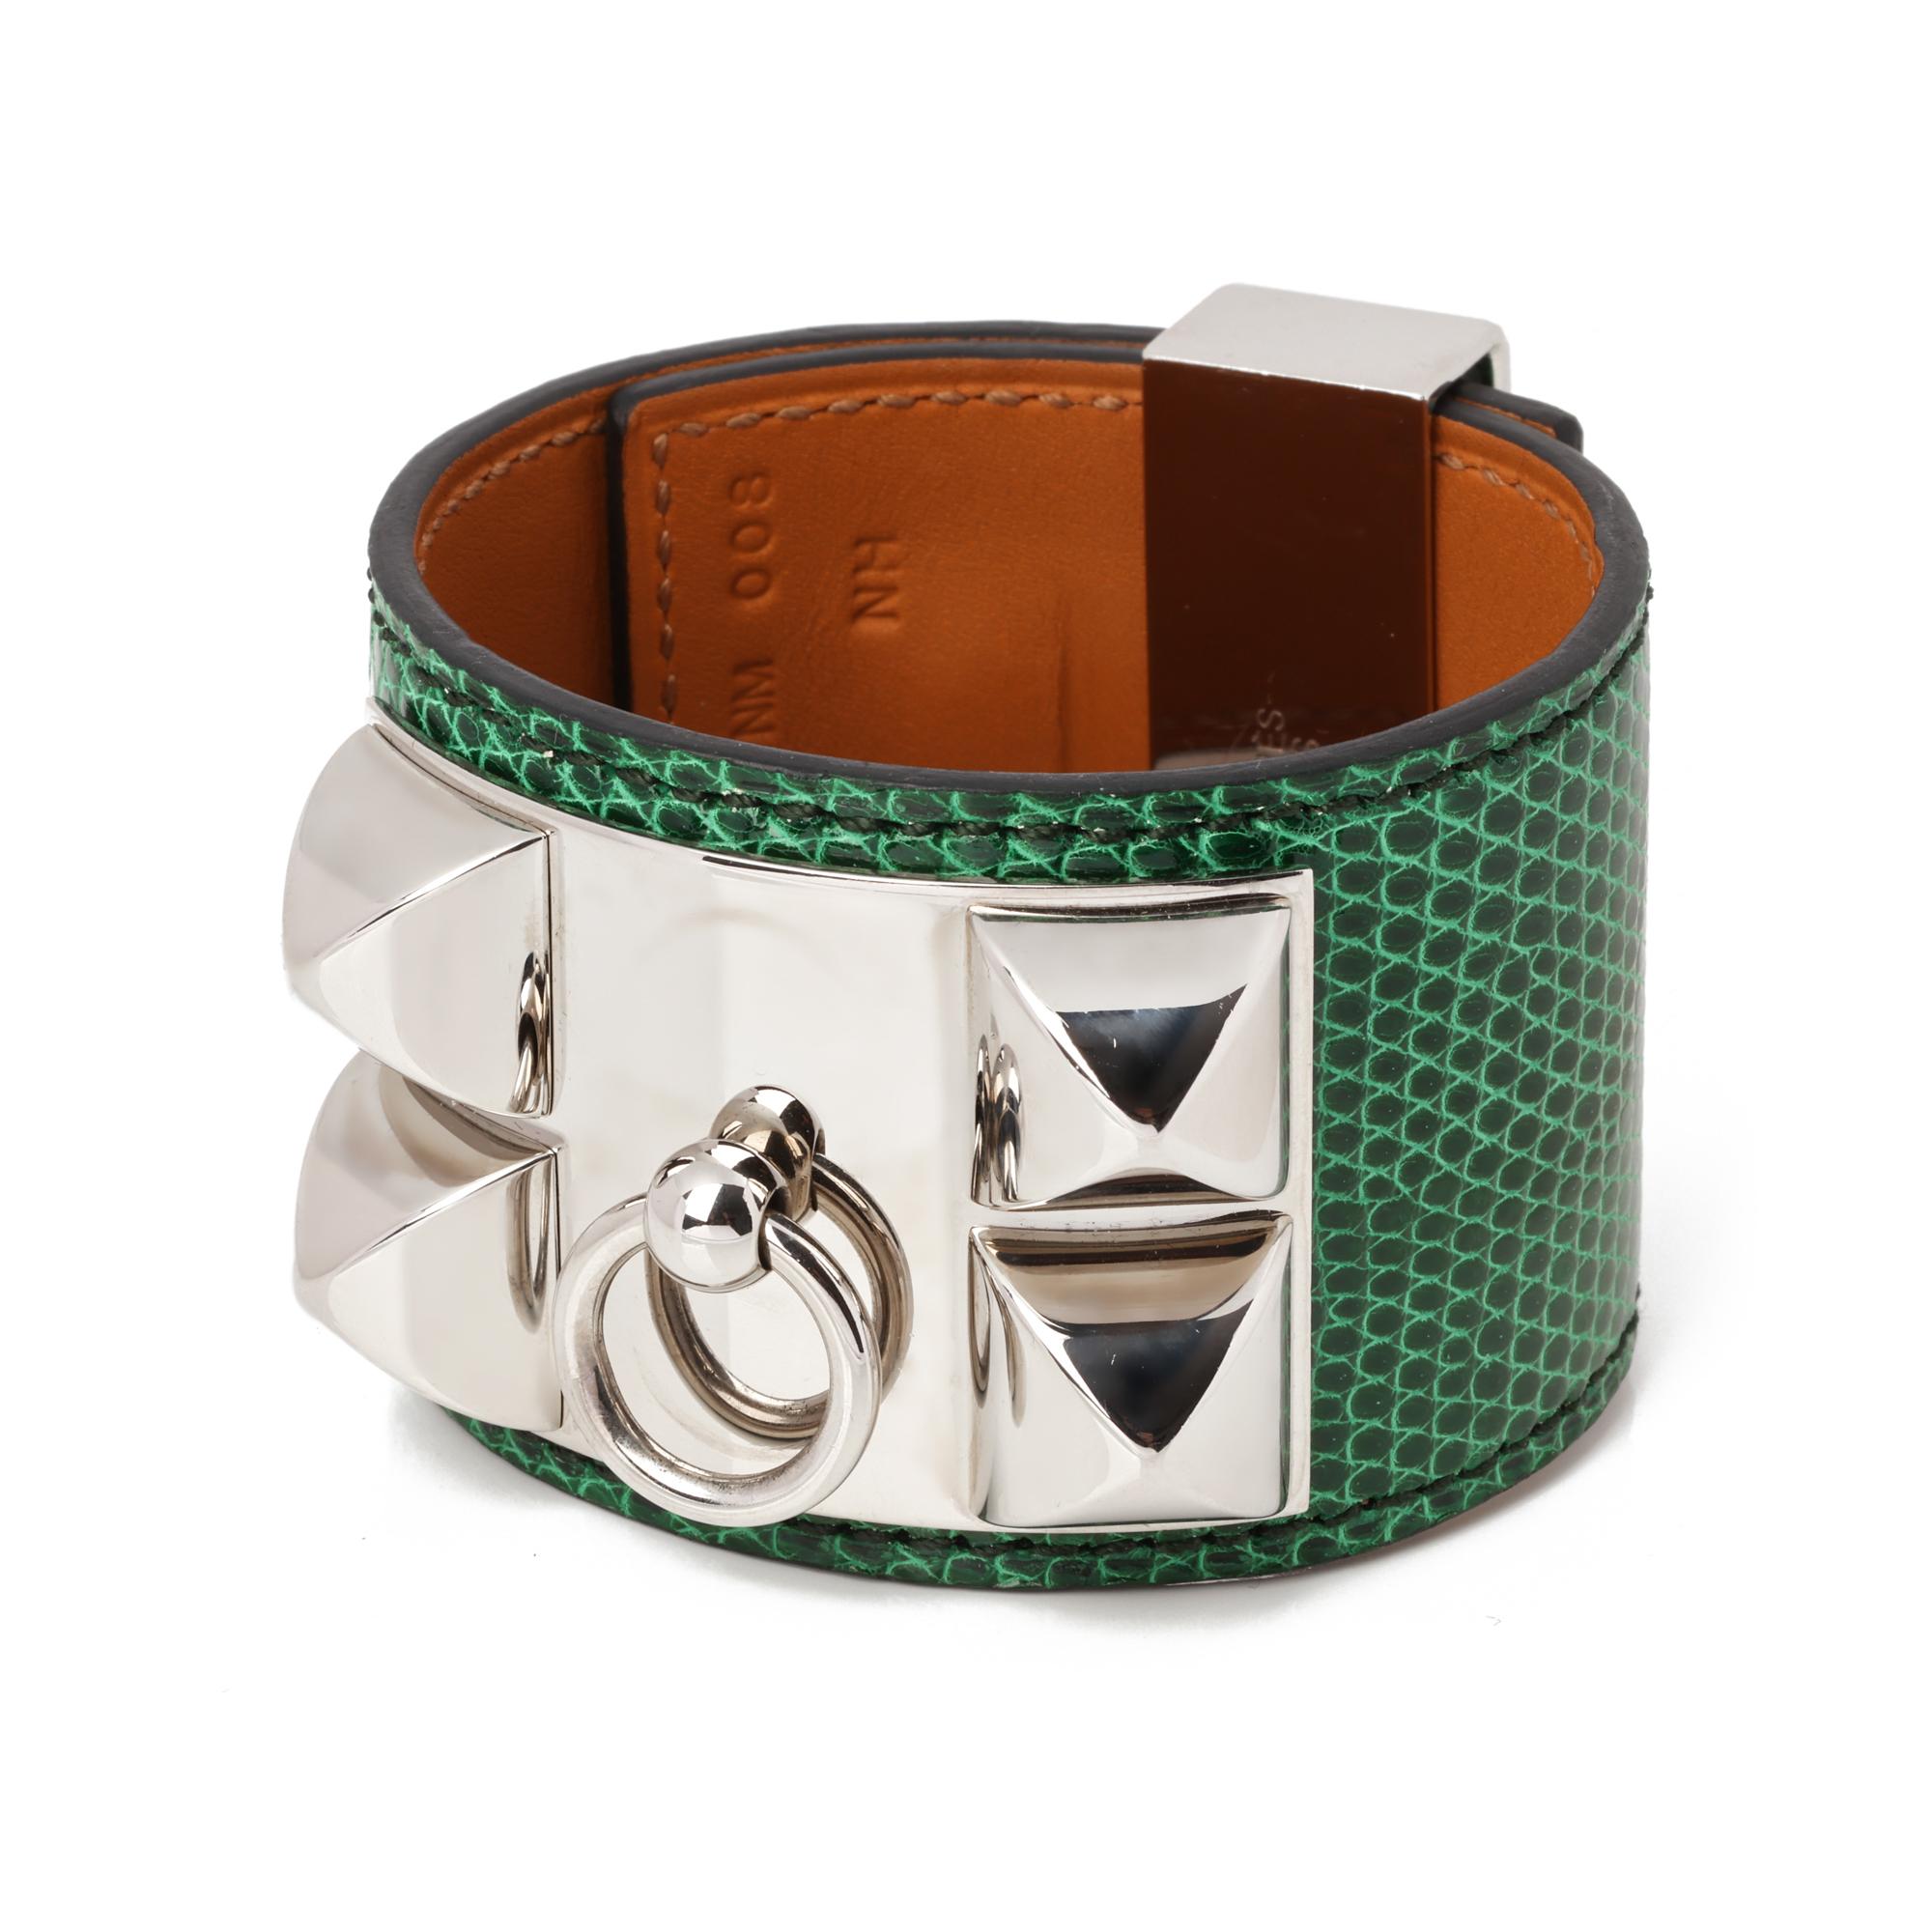 Hermès VERT EMERAUDE LIZARD LEATHER COLLIER DE CHIEN T2

CONDITION NOTES
The exterior is in excellent condition with light signs of use.
The hardware is in excellent condition with light signs of use. The back pin has tarnished.
Overall this bag is